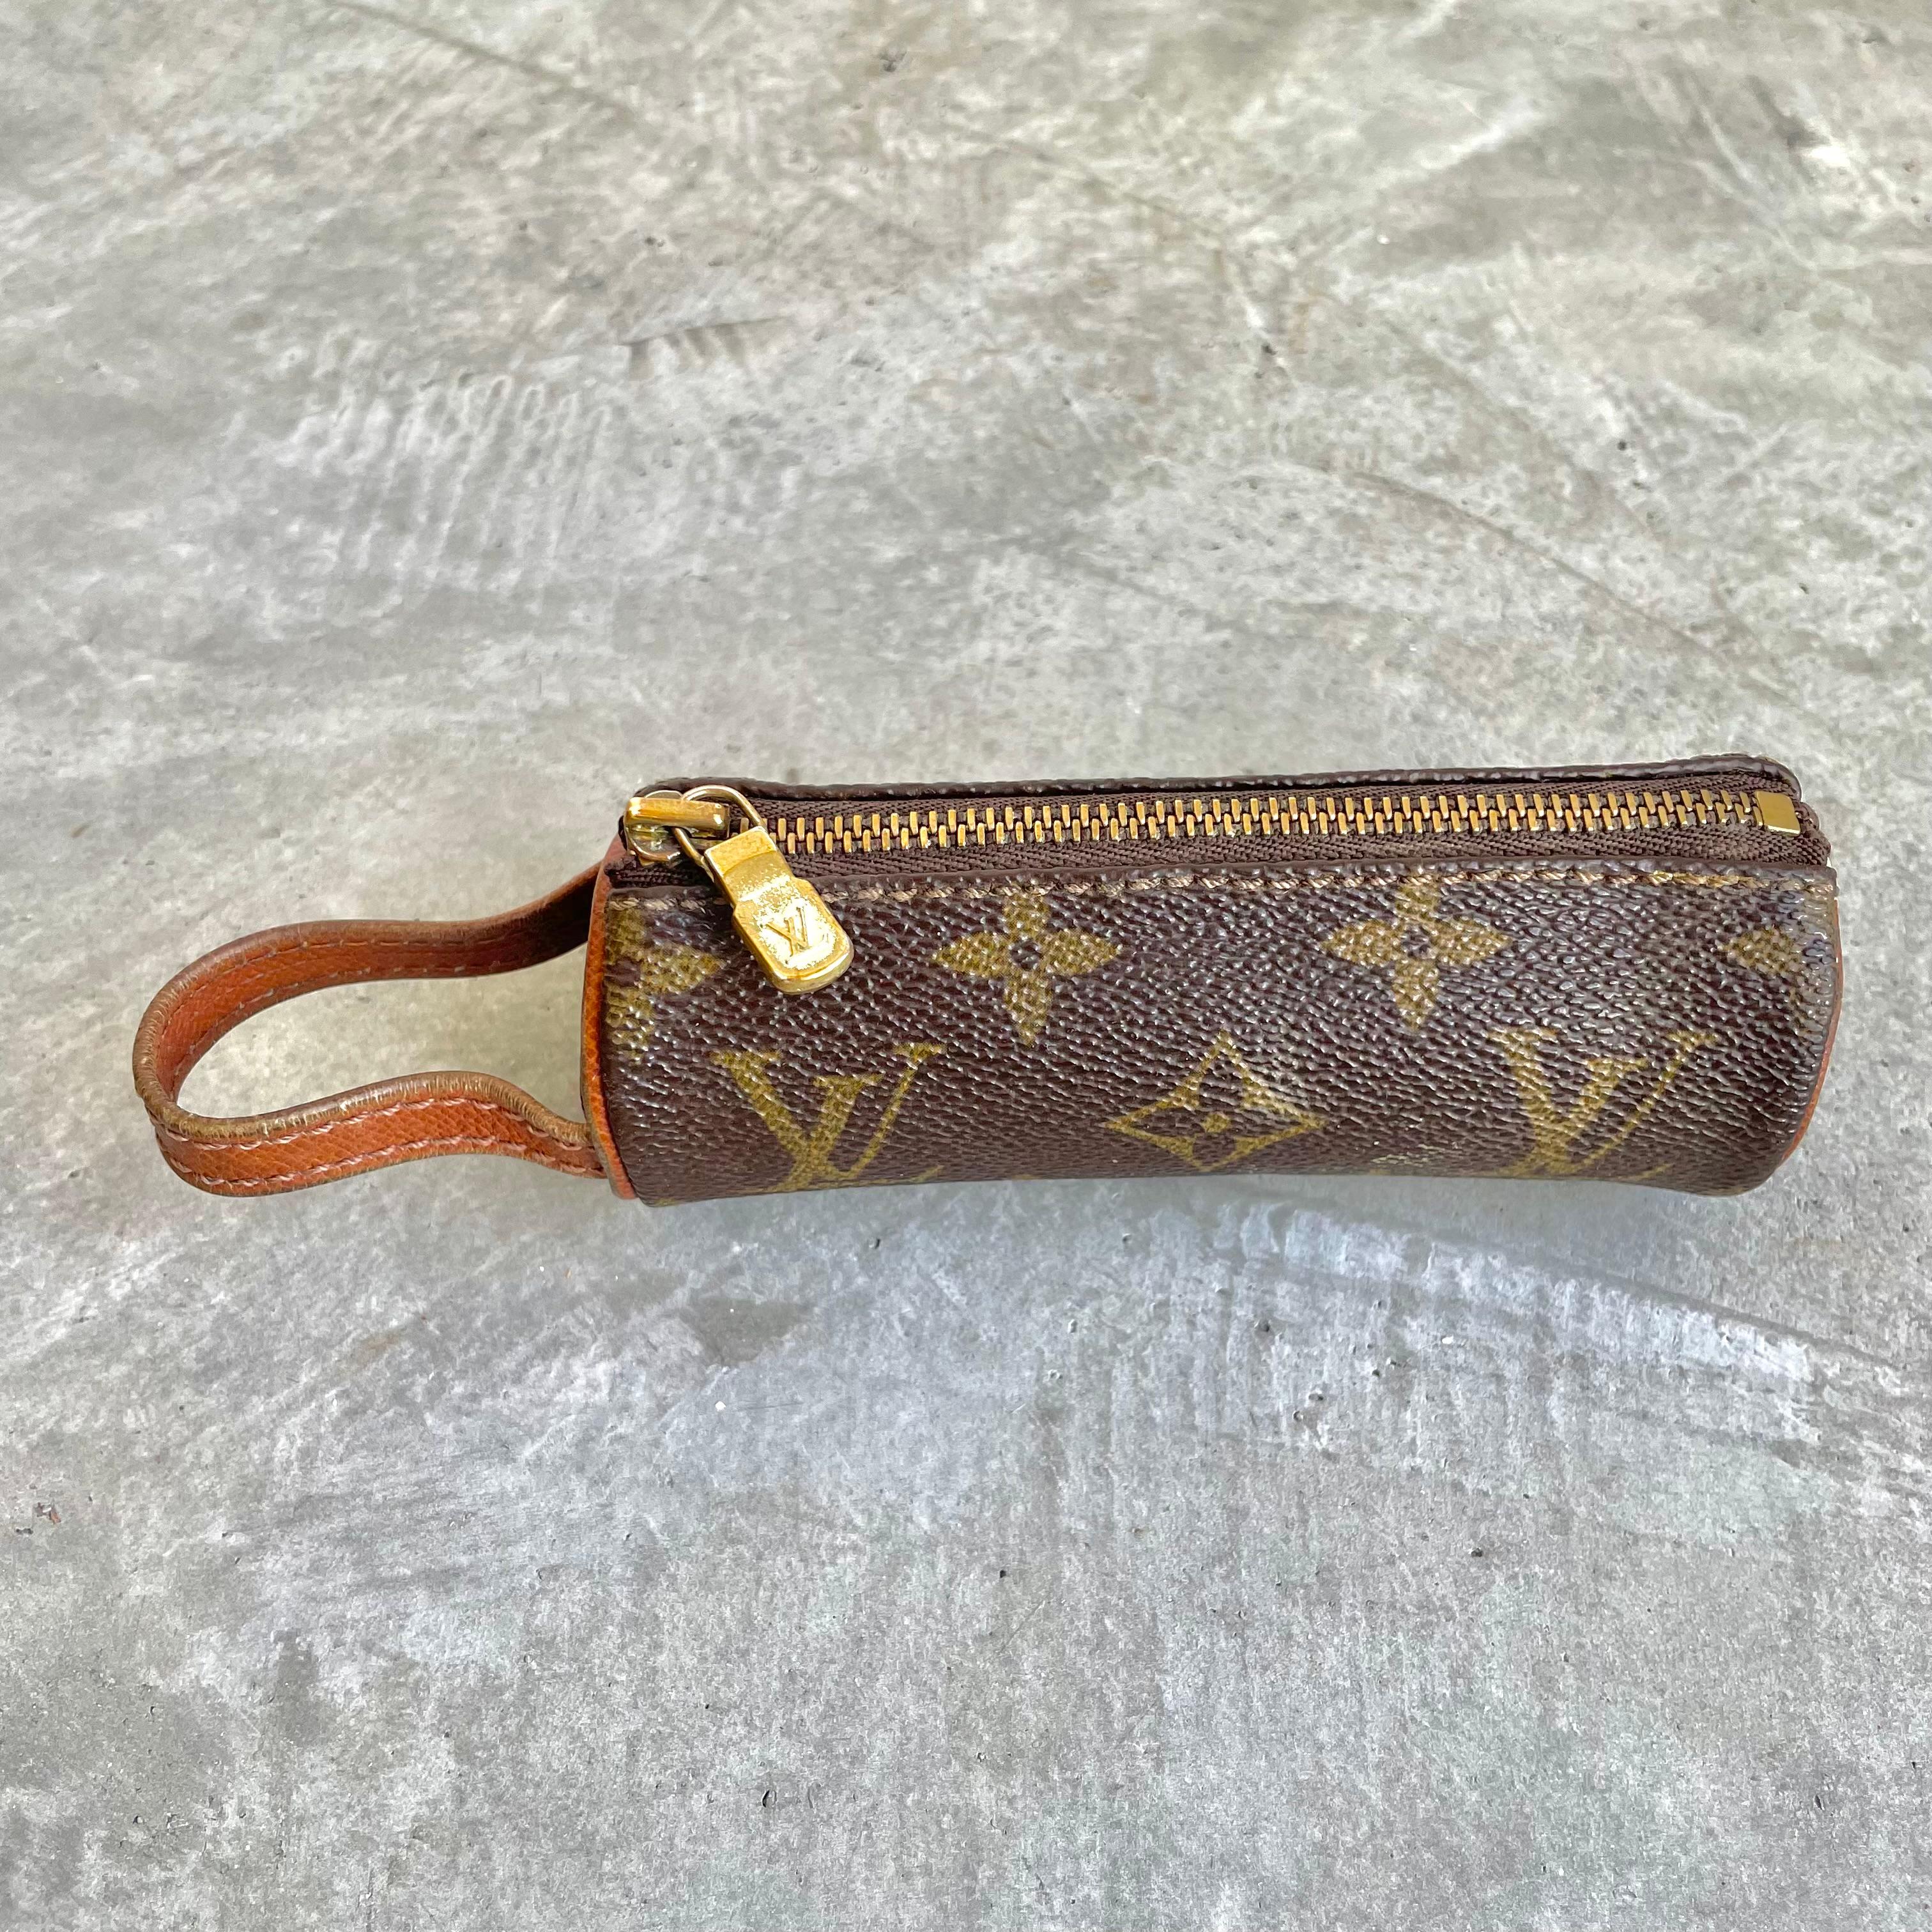 Louis Vuitton golf ball holder from the 1960s. Perfect for storing a few extra golfballs on the course. Also, great little accessory for storing makeup in your purse. Comes with a small leather strap for hanging or carrying. The case is made of the